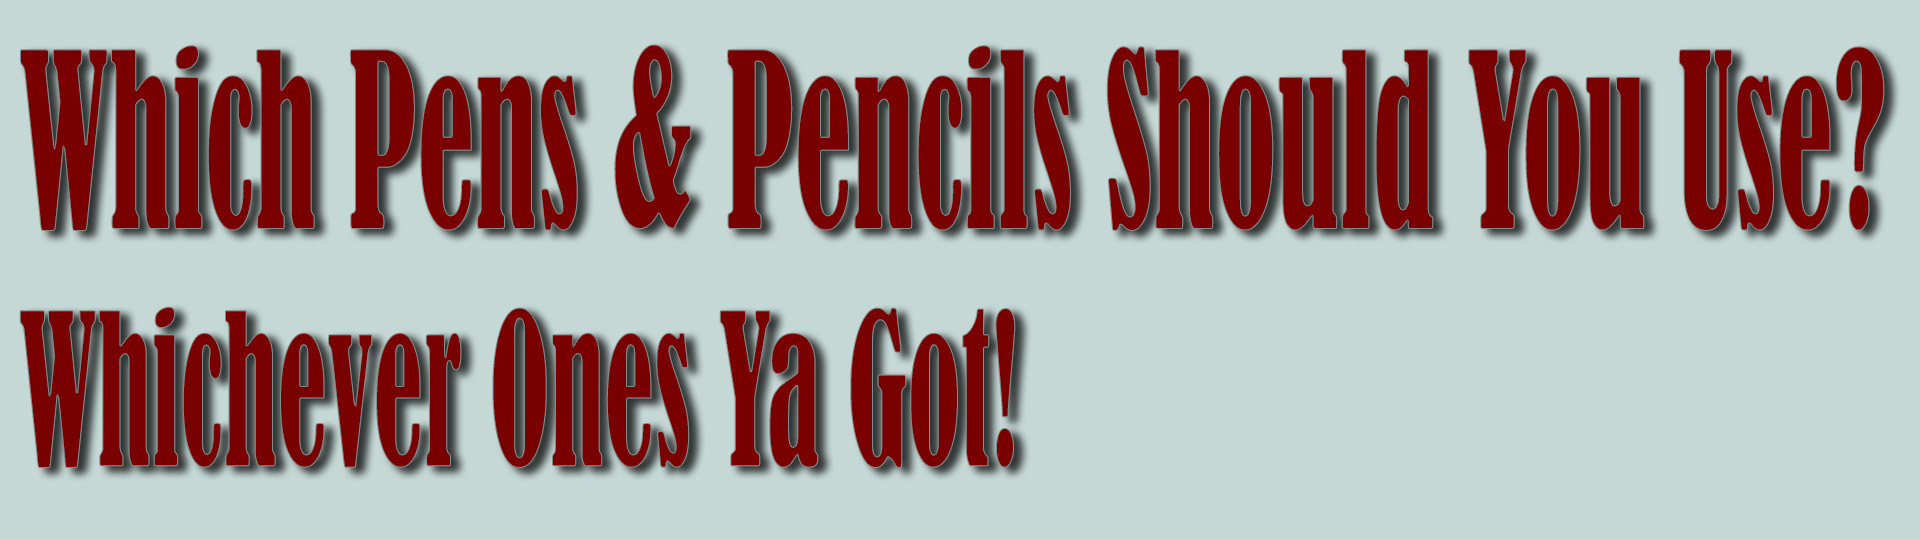 Which Pens and Pencils Should You Use?